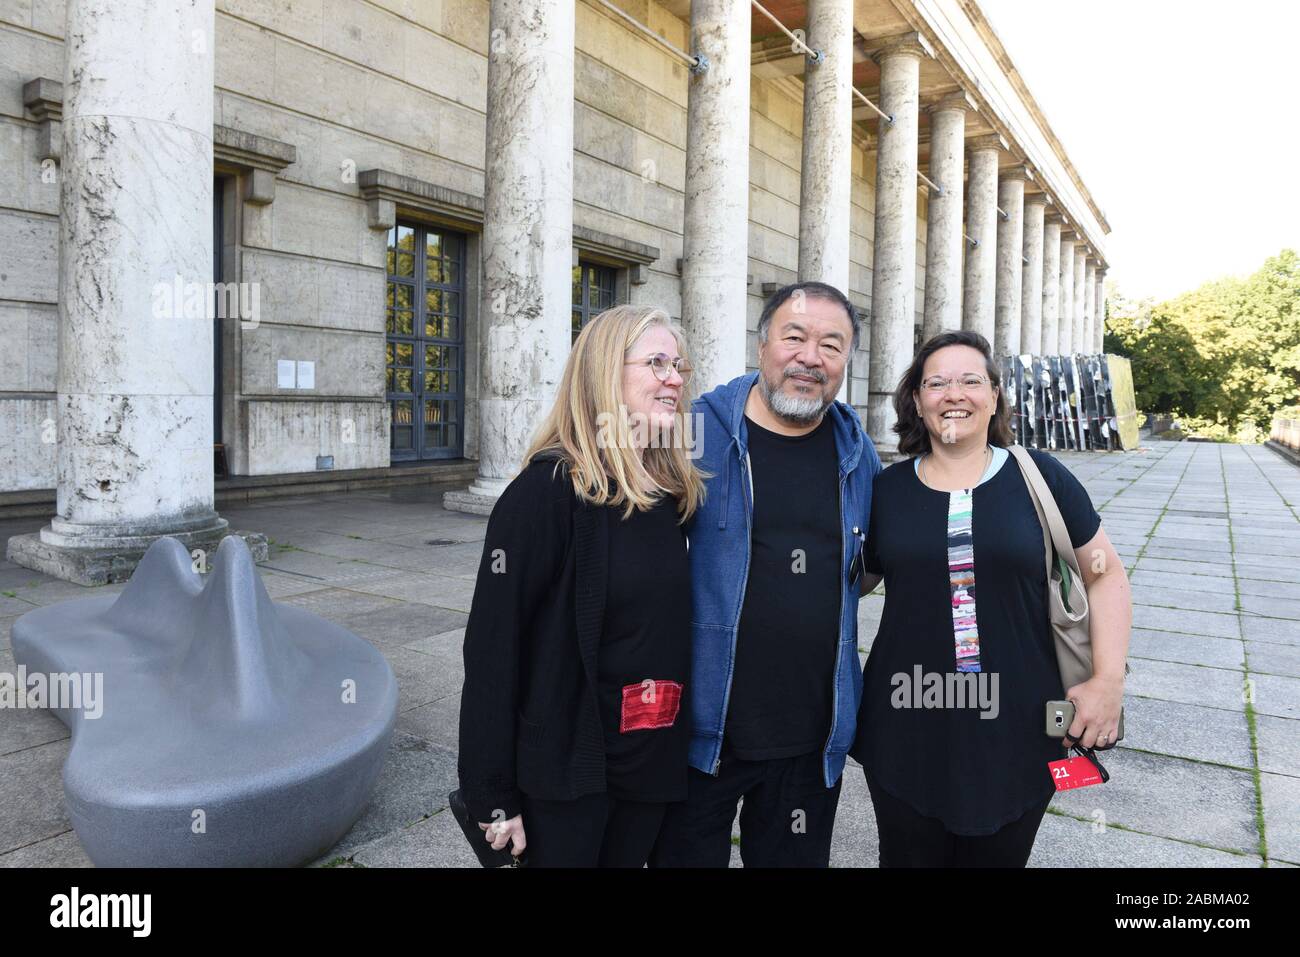 Ai Weiwei during a protest action of the works council at the Haus der Kunst against the planned staff reduction by outsourcing the areas of supervision, cash desk and gate. The picture shows the Chinese artist with two works council members in front of the museum. [automated translation] Stock Photo